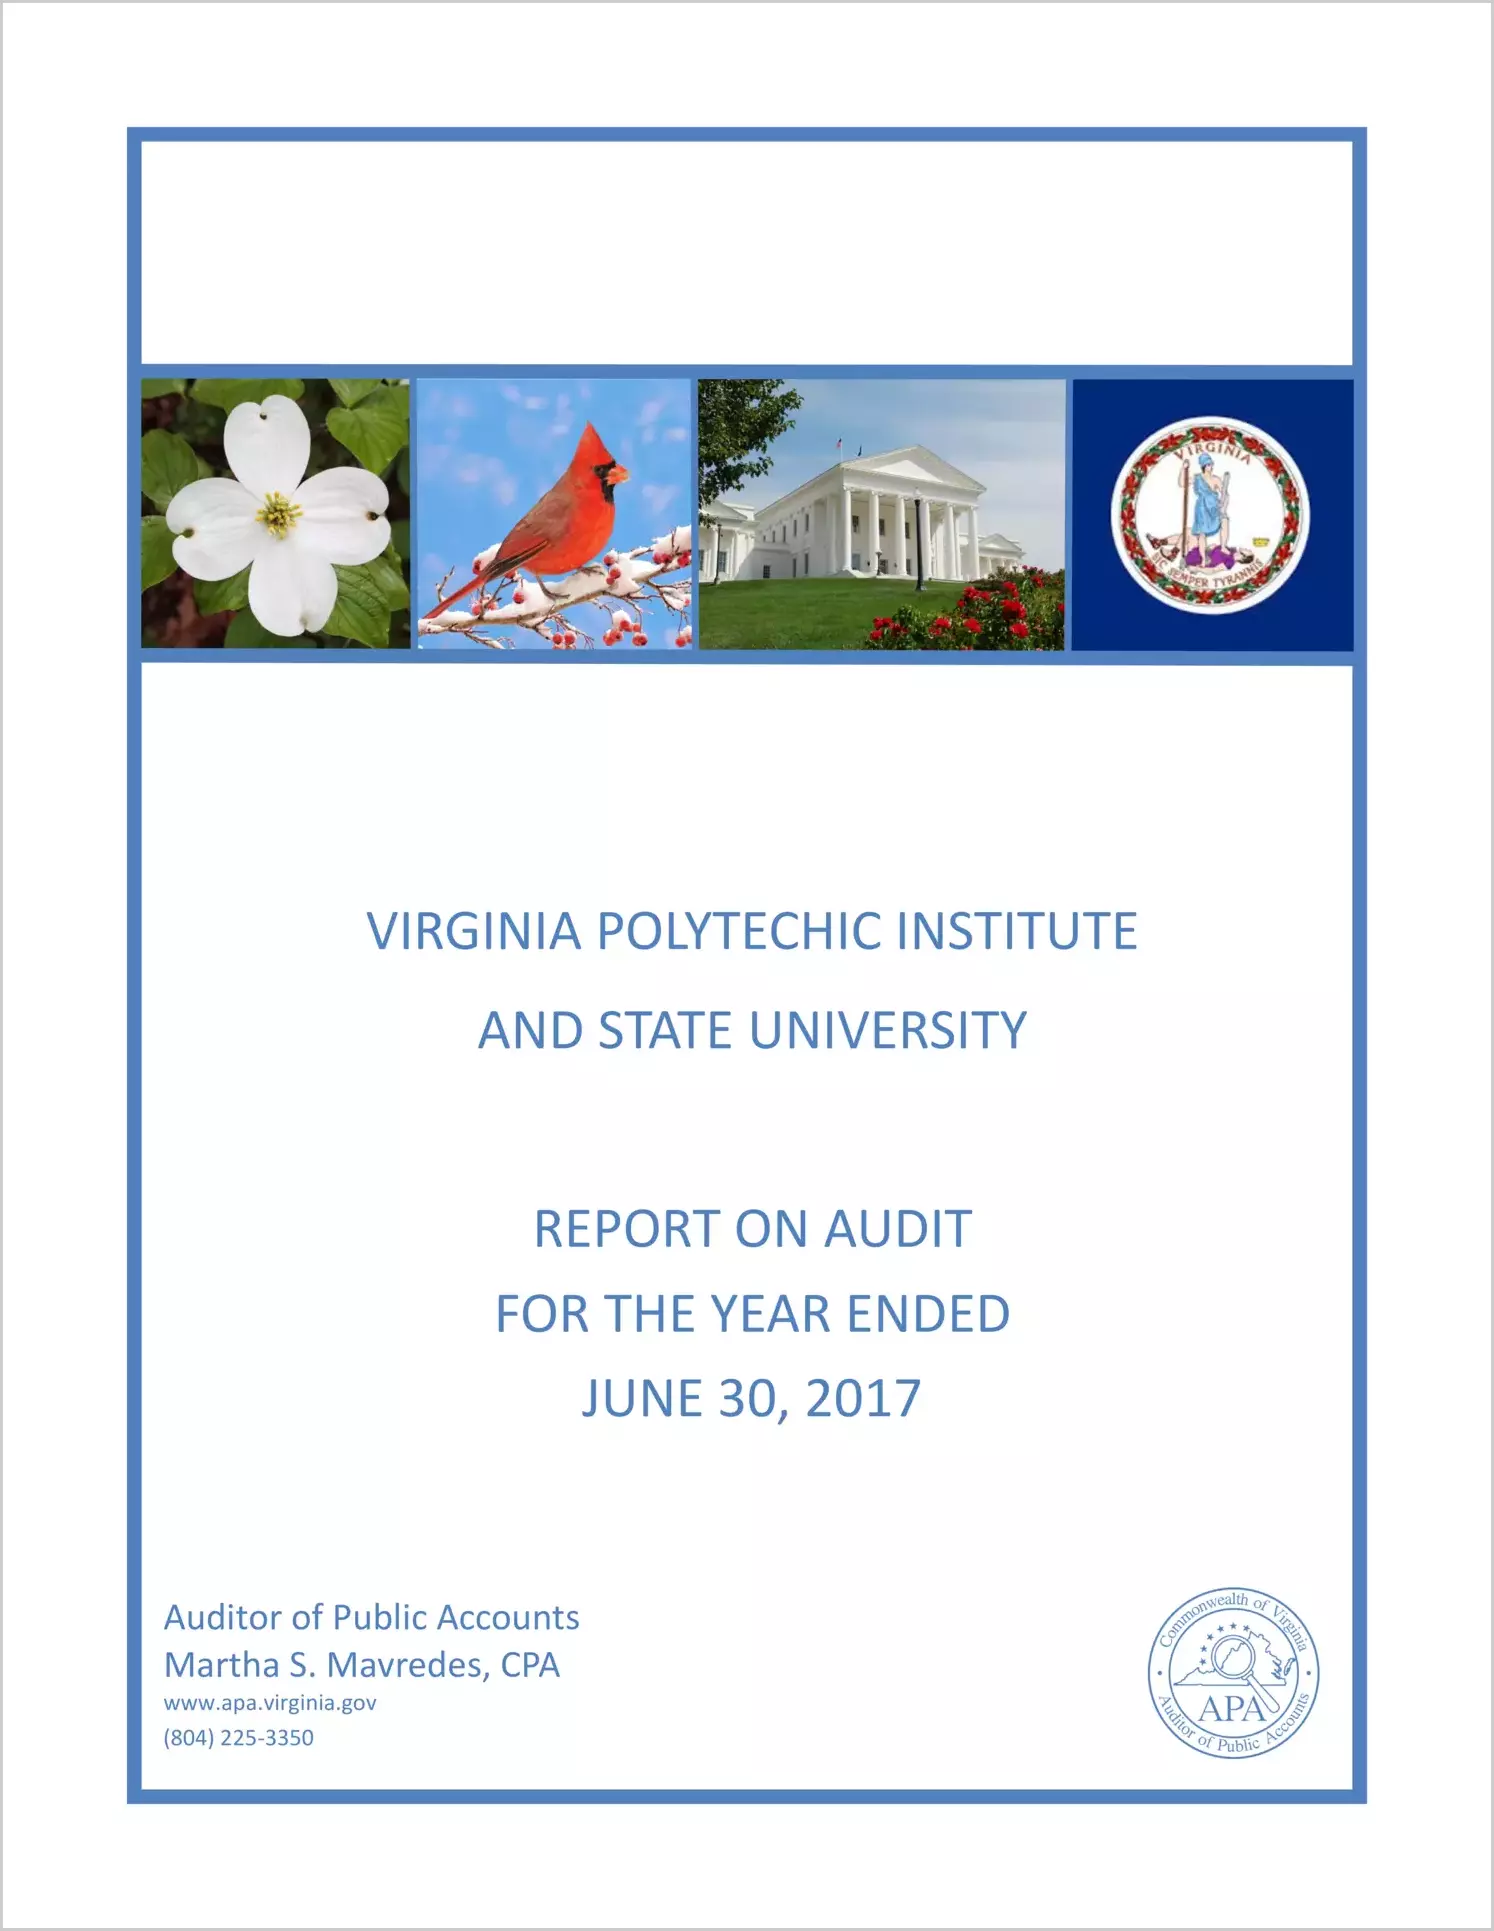 Virginia Polytechnic Institute and State University for the year ended June 30, 2017